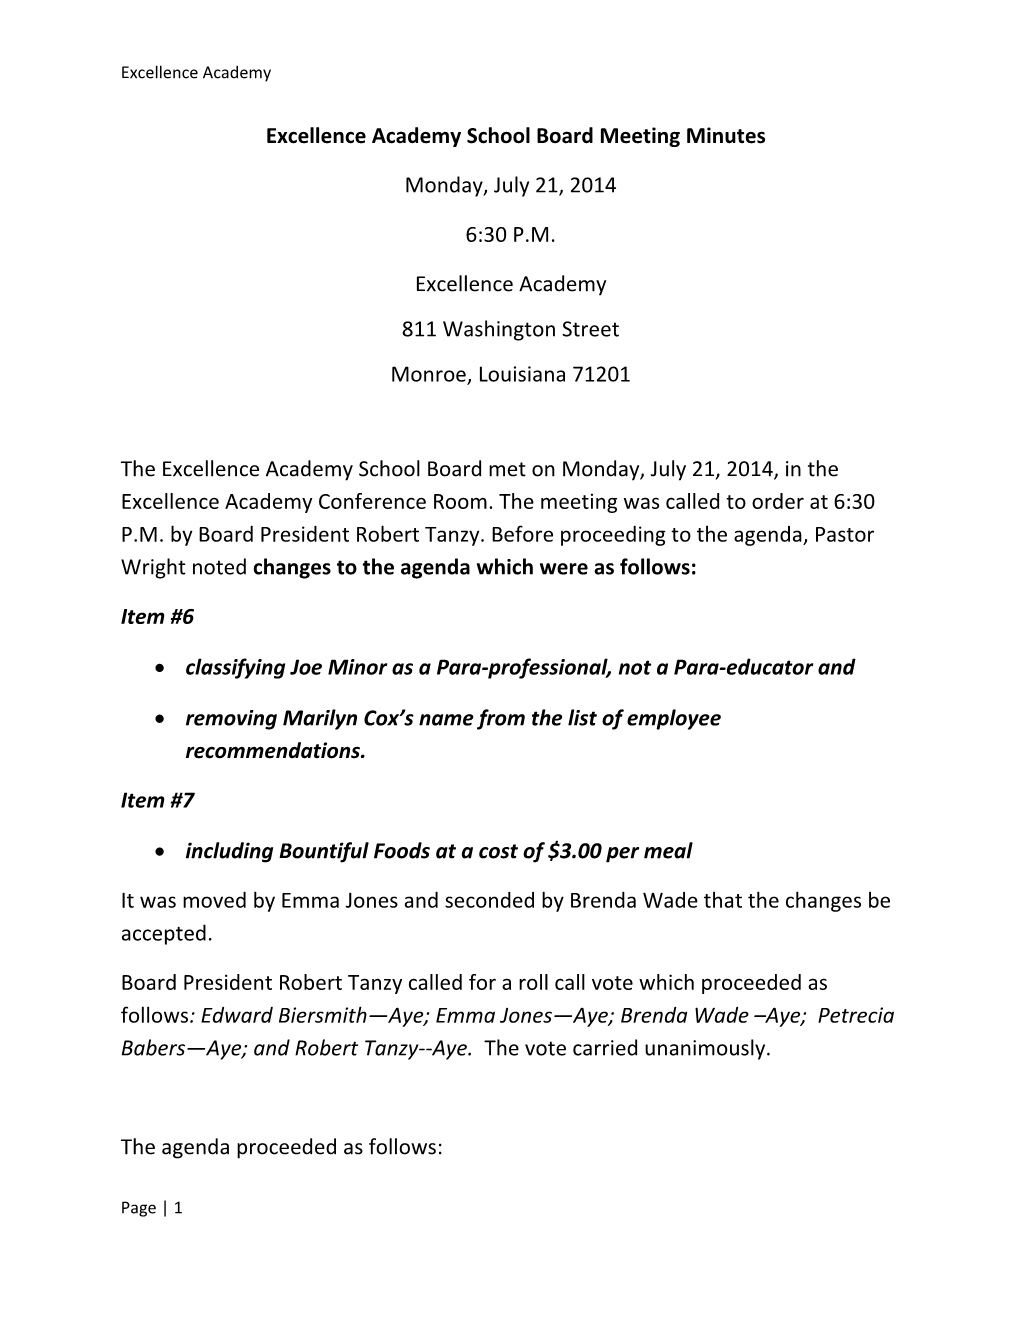 Excellence Academy School Board Meeting Minutes